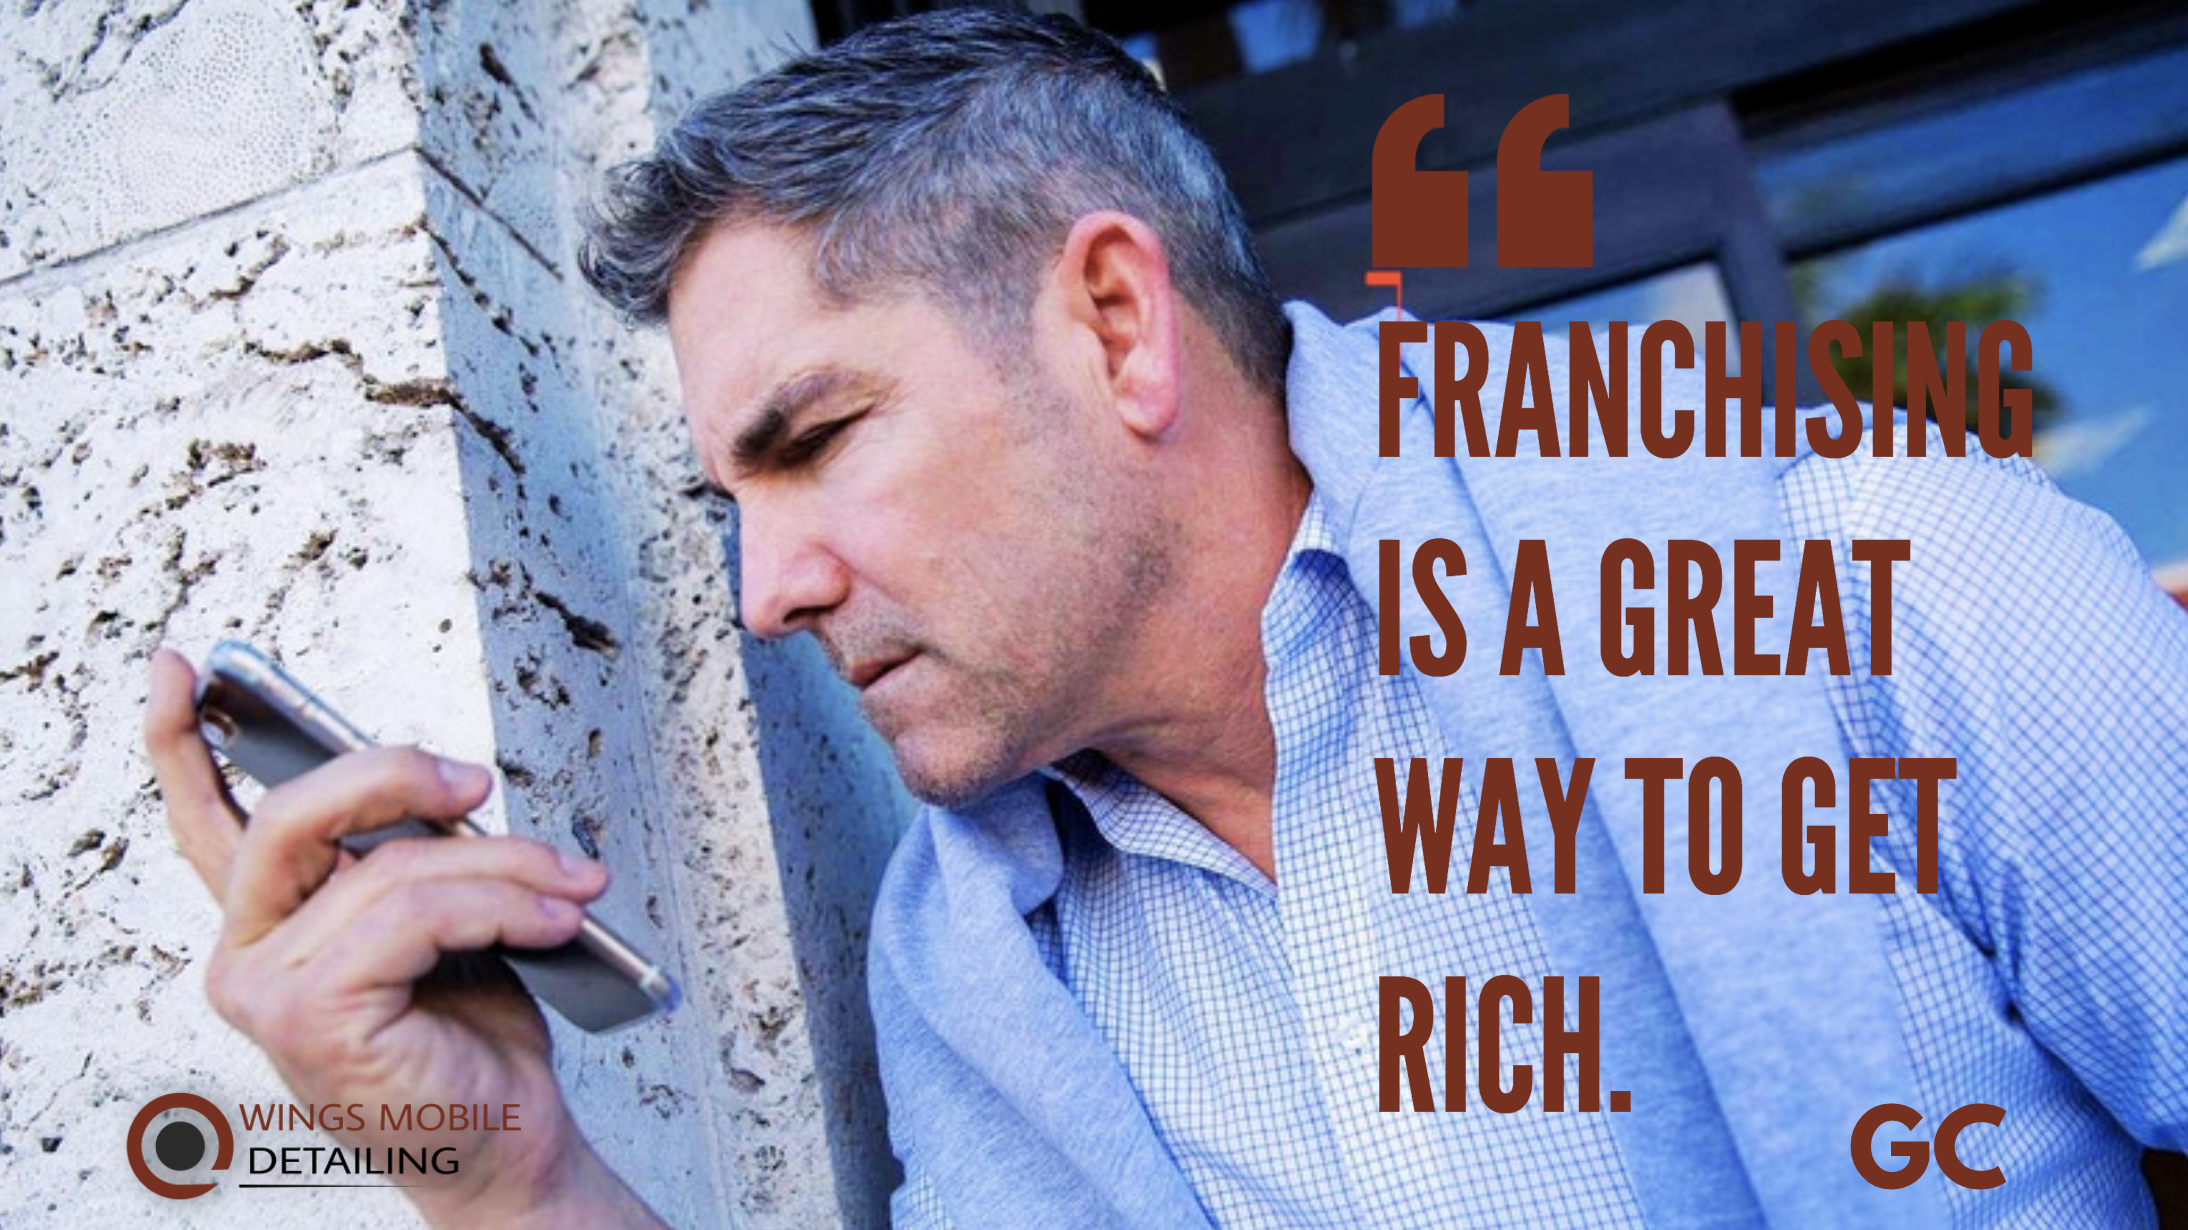 Grant Cardone recommends these top franchises to start